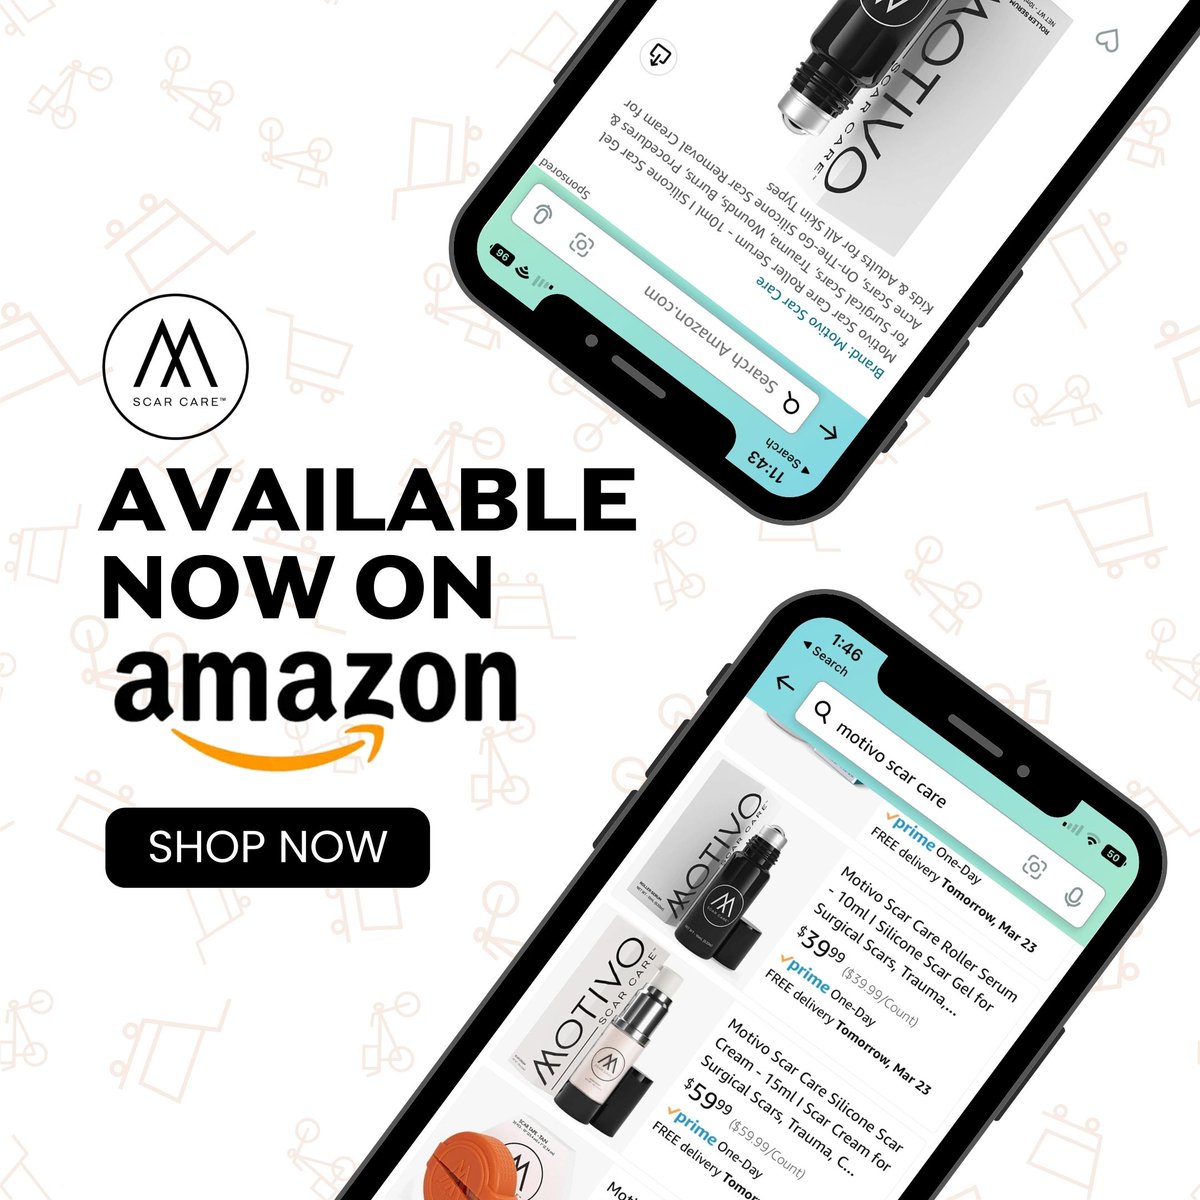 Exciting news! You can now find Motivo Scar Care products on Amazon! We're thrilled to offer easier access to our scar care products. Whether you're looking for scar tape or silicone based topicals, we've got you covered. Check us out on Amazon today! #scarcare